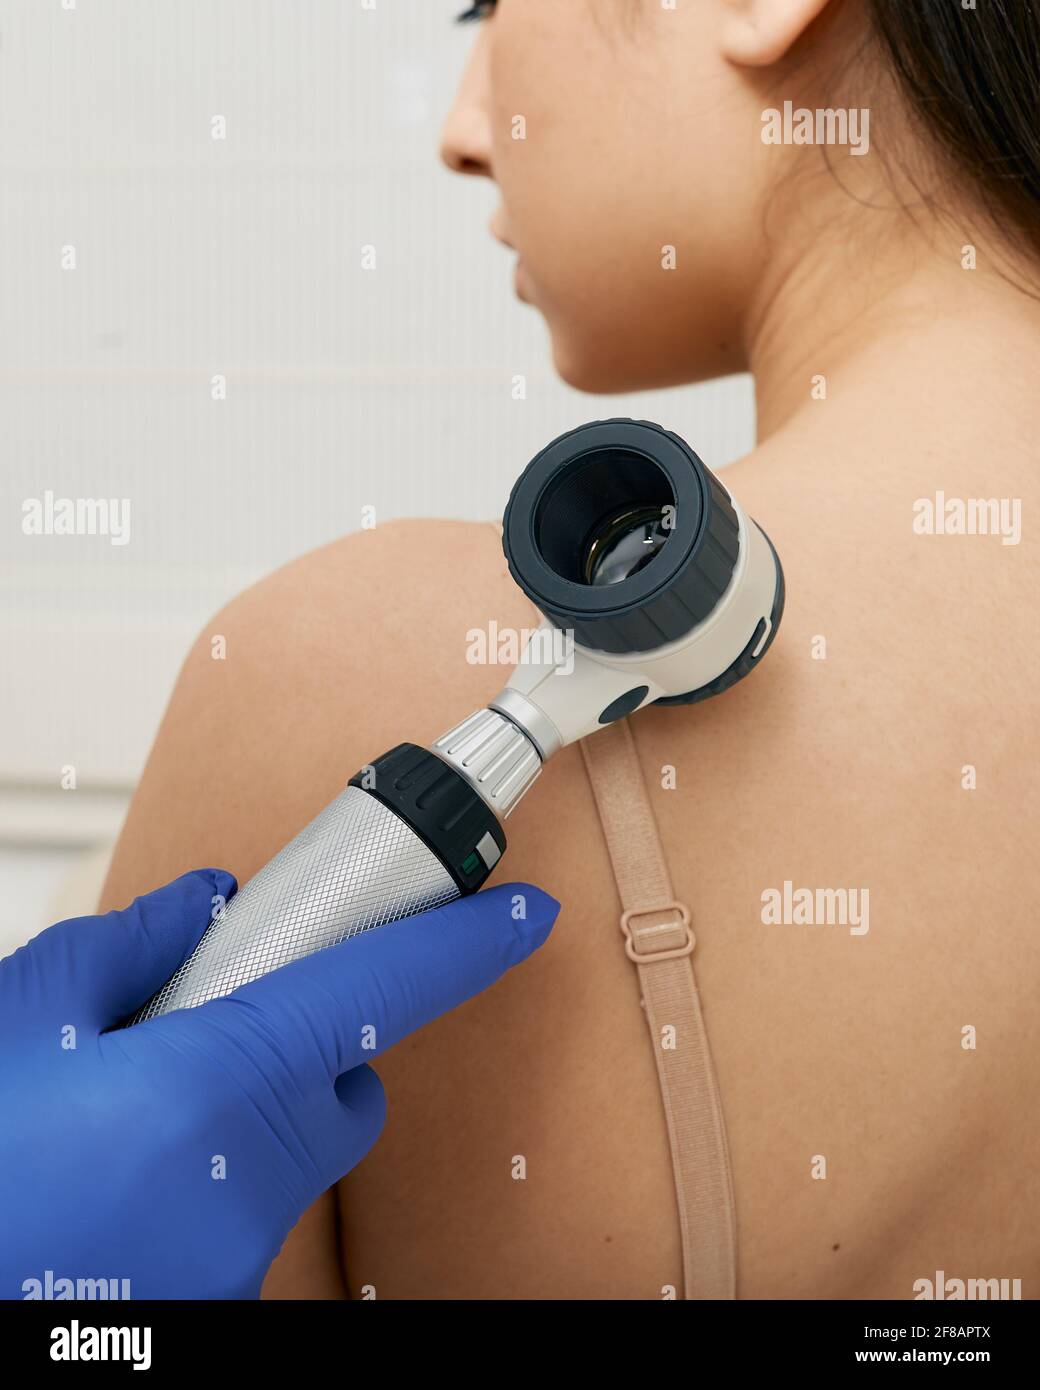 Mole dermoscopy. Physician check-up of a patient's skin with a dermatoscopy for prevention of melanoma and skin cancer, close-up. Stock Photo